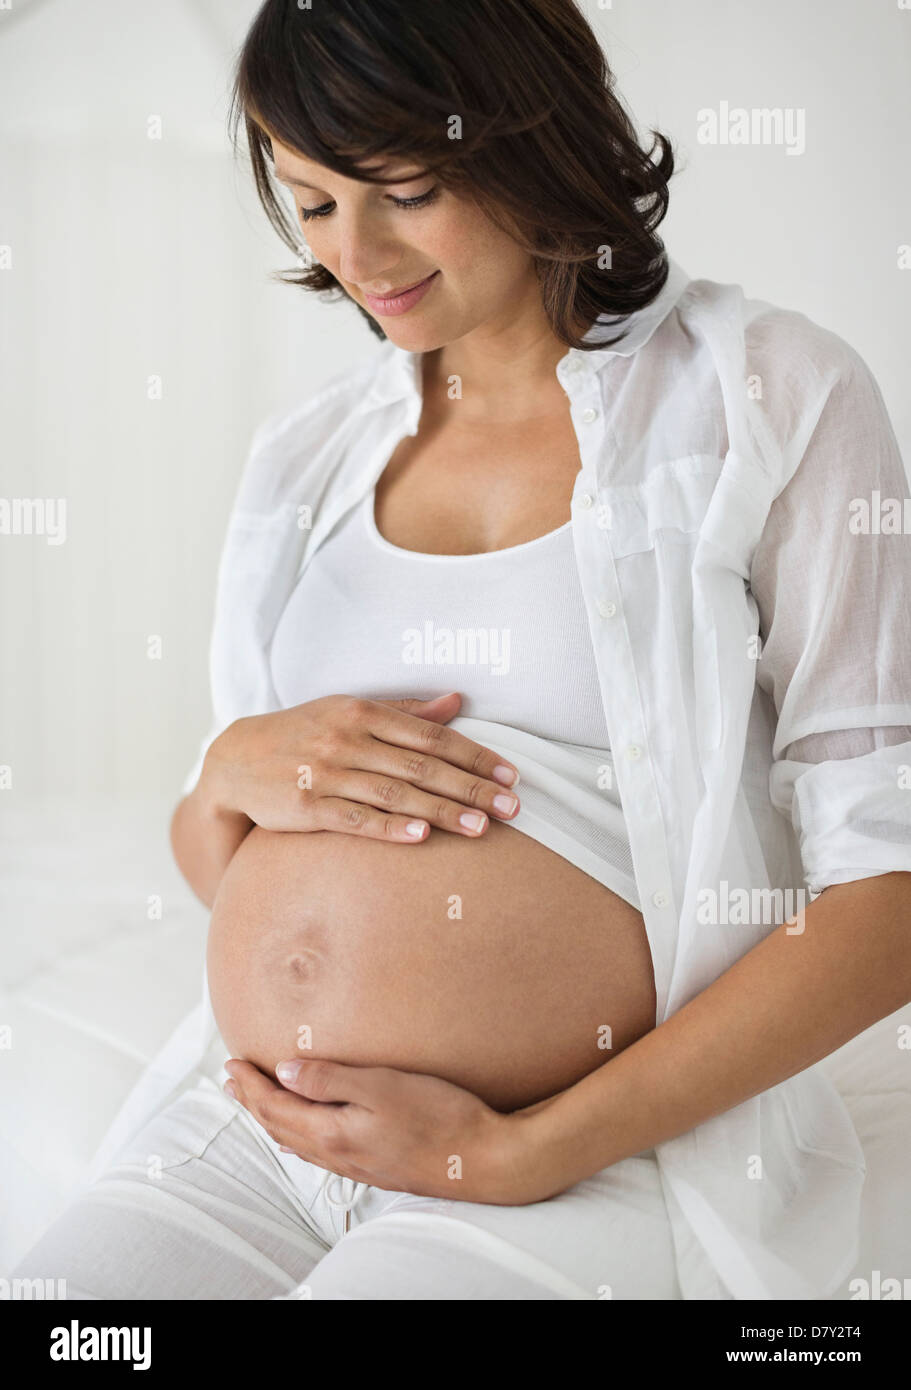 Pregnant woman holding her belly Banque D'Images